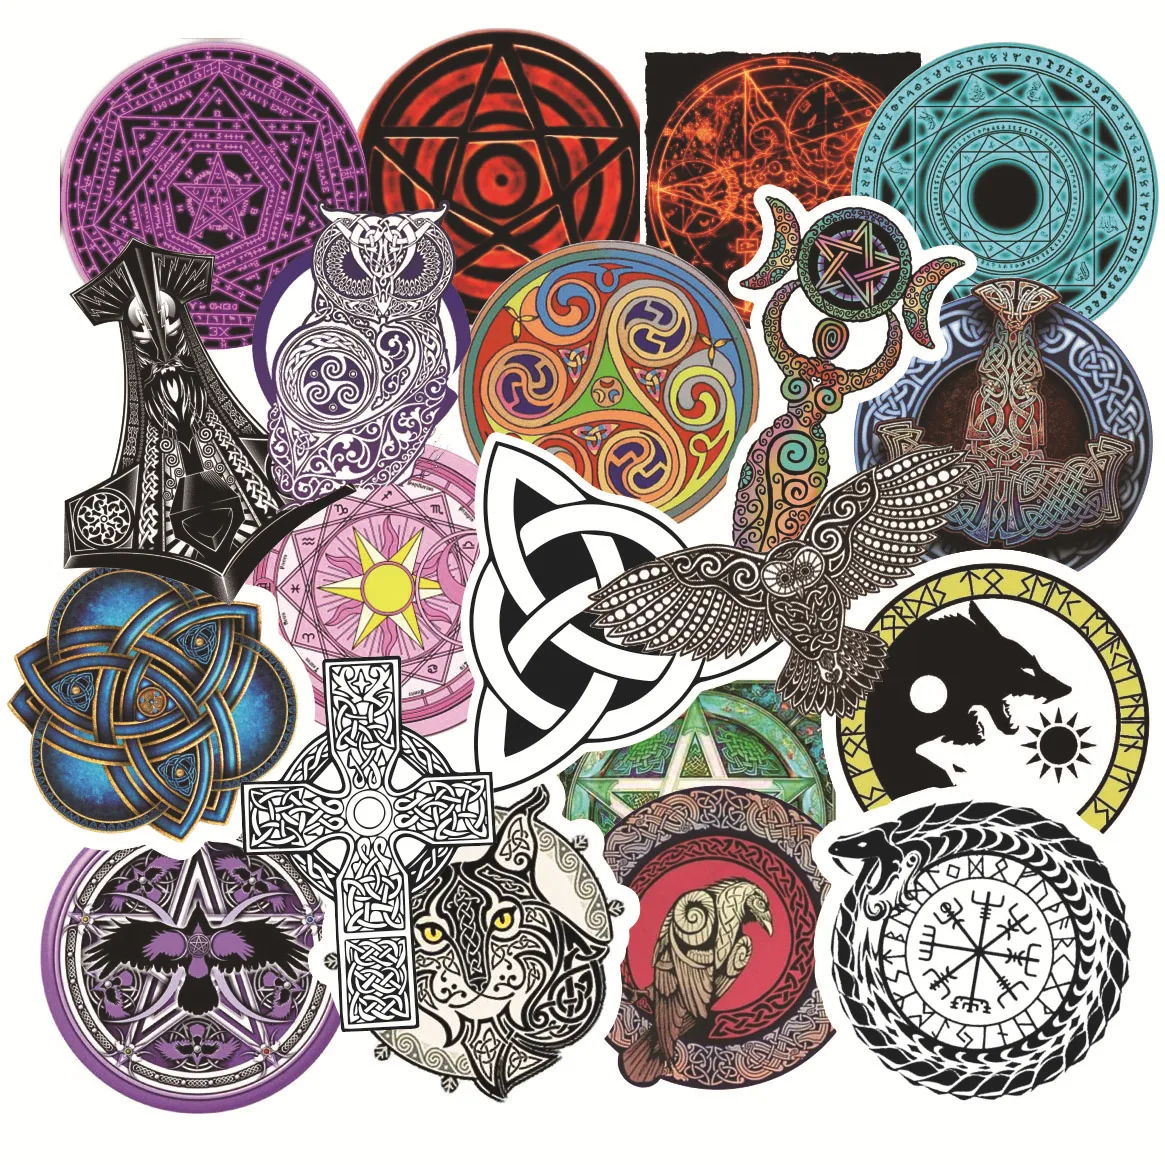 50pcs Mysterious Totem Symbol Rune Viking Pirates Style Stickers Toys for Mobile Phone Laptop Suitcase Skateboard Decal Stickers